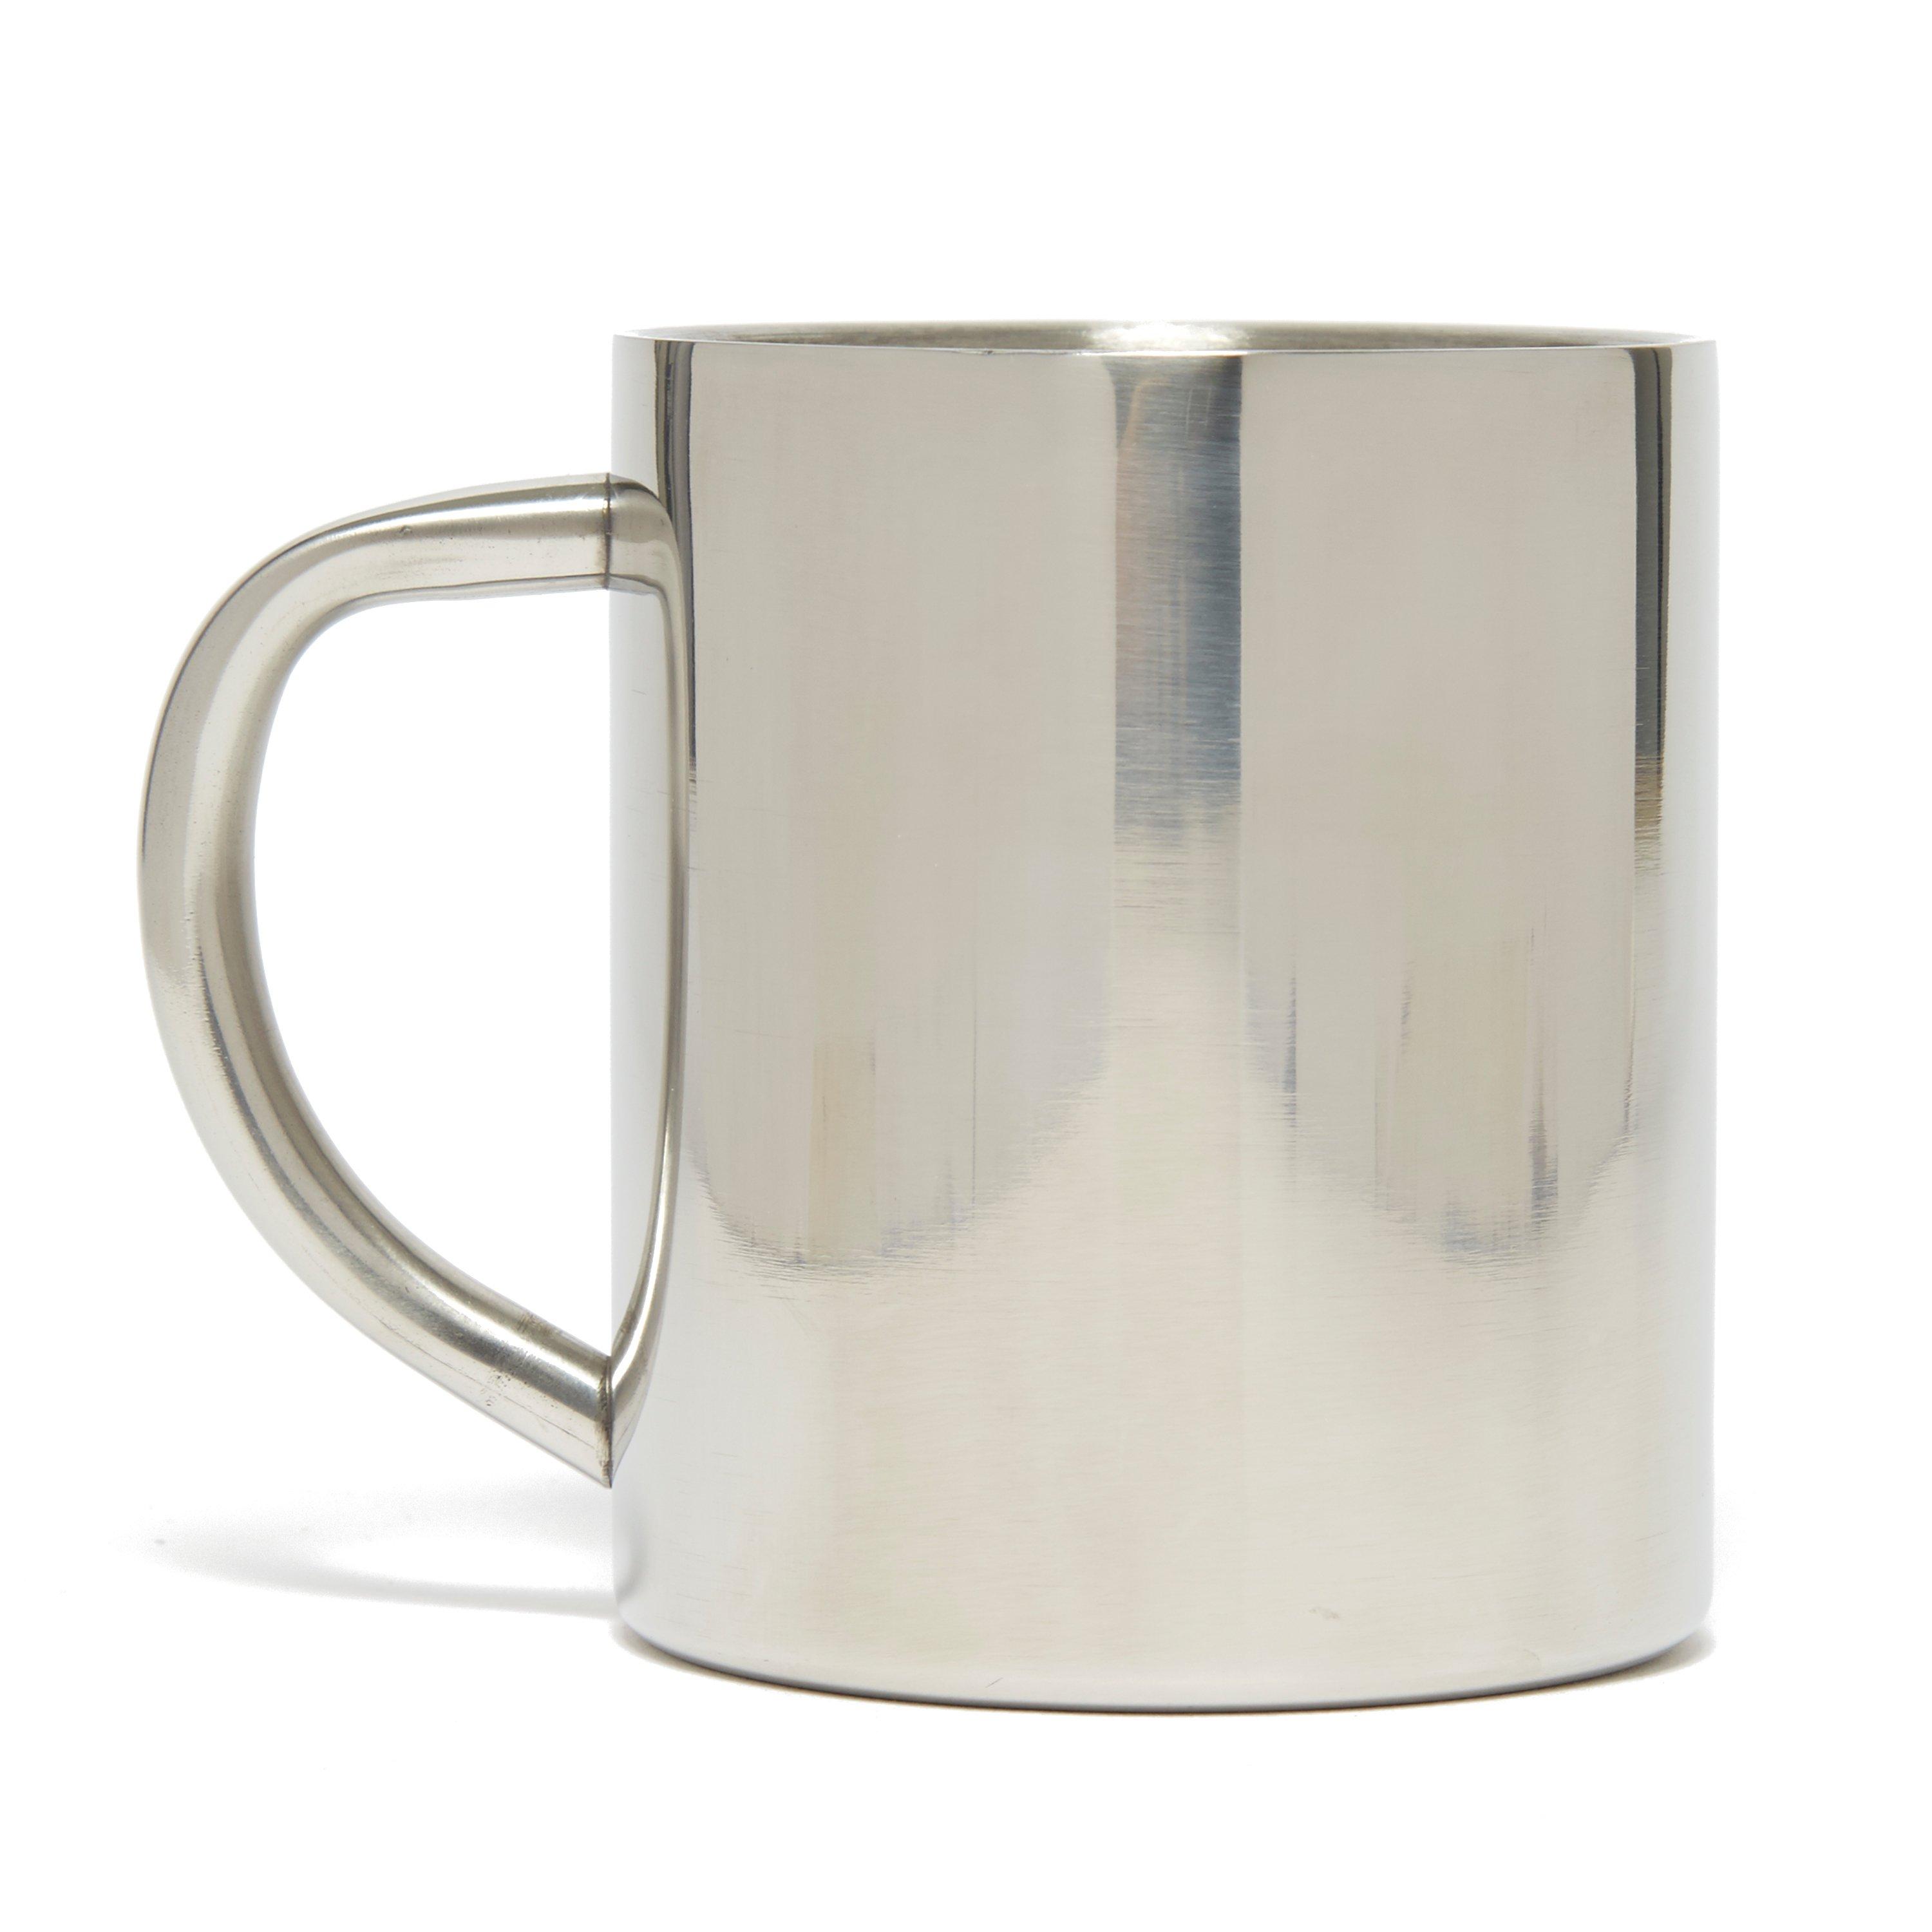 Image of Lifeventure Stainless Steel Mug - Silver, Silver